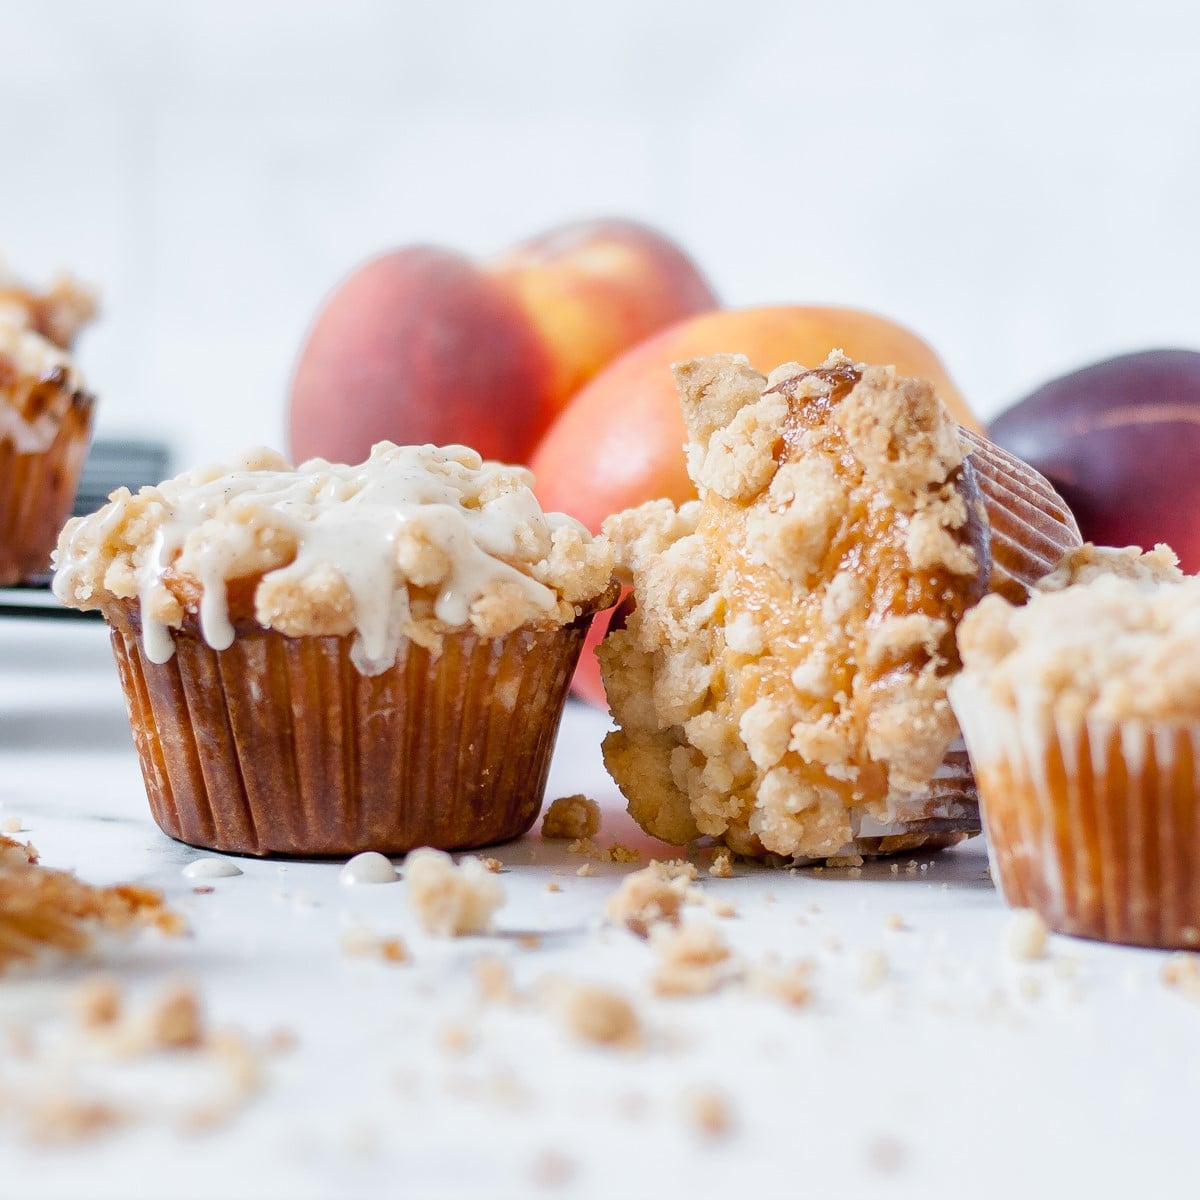 Peach muffins with vanilla bean glaze, streusel crumbs and peaches in the background.